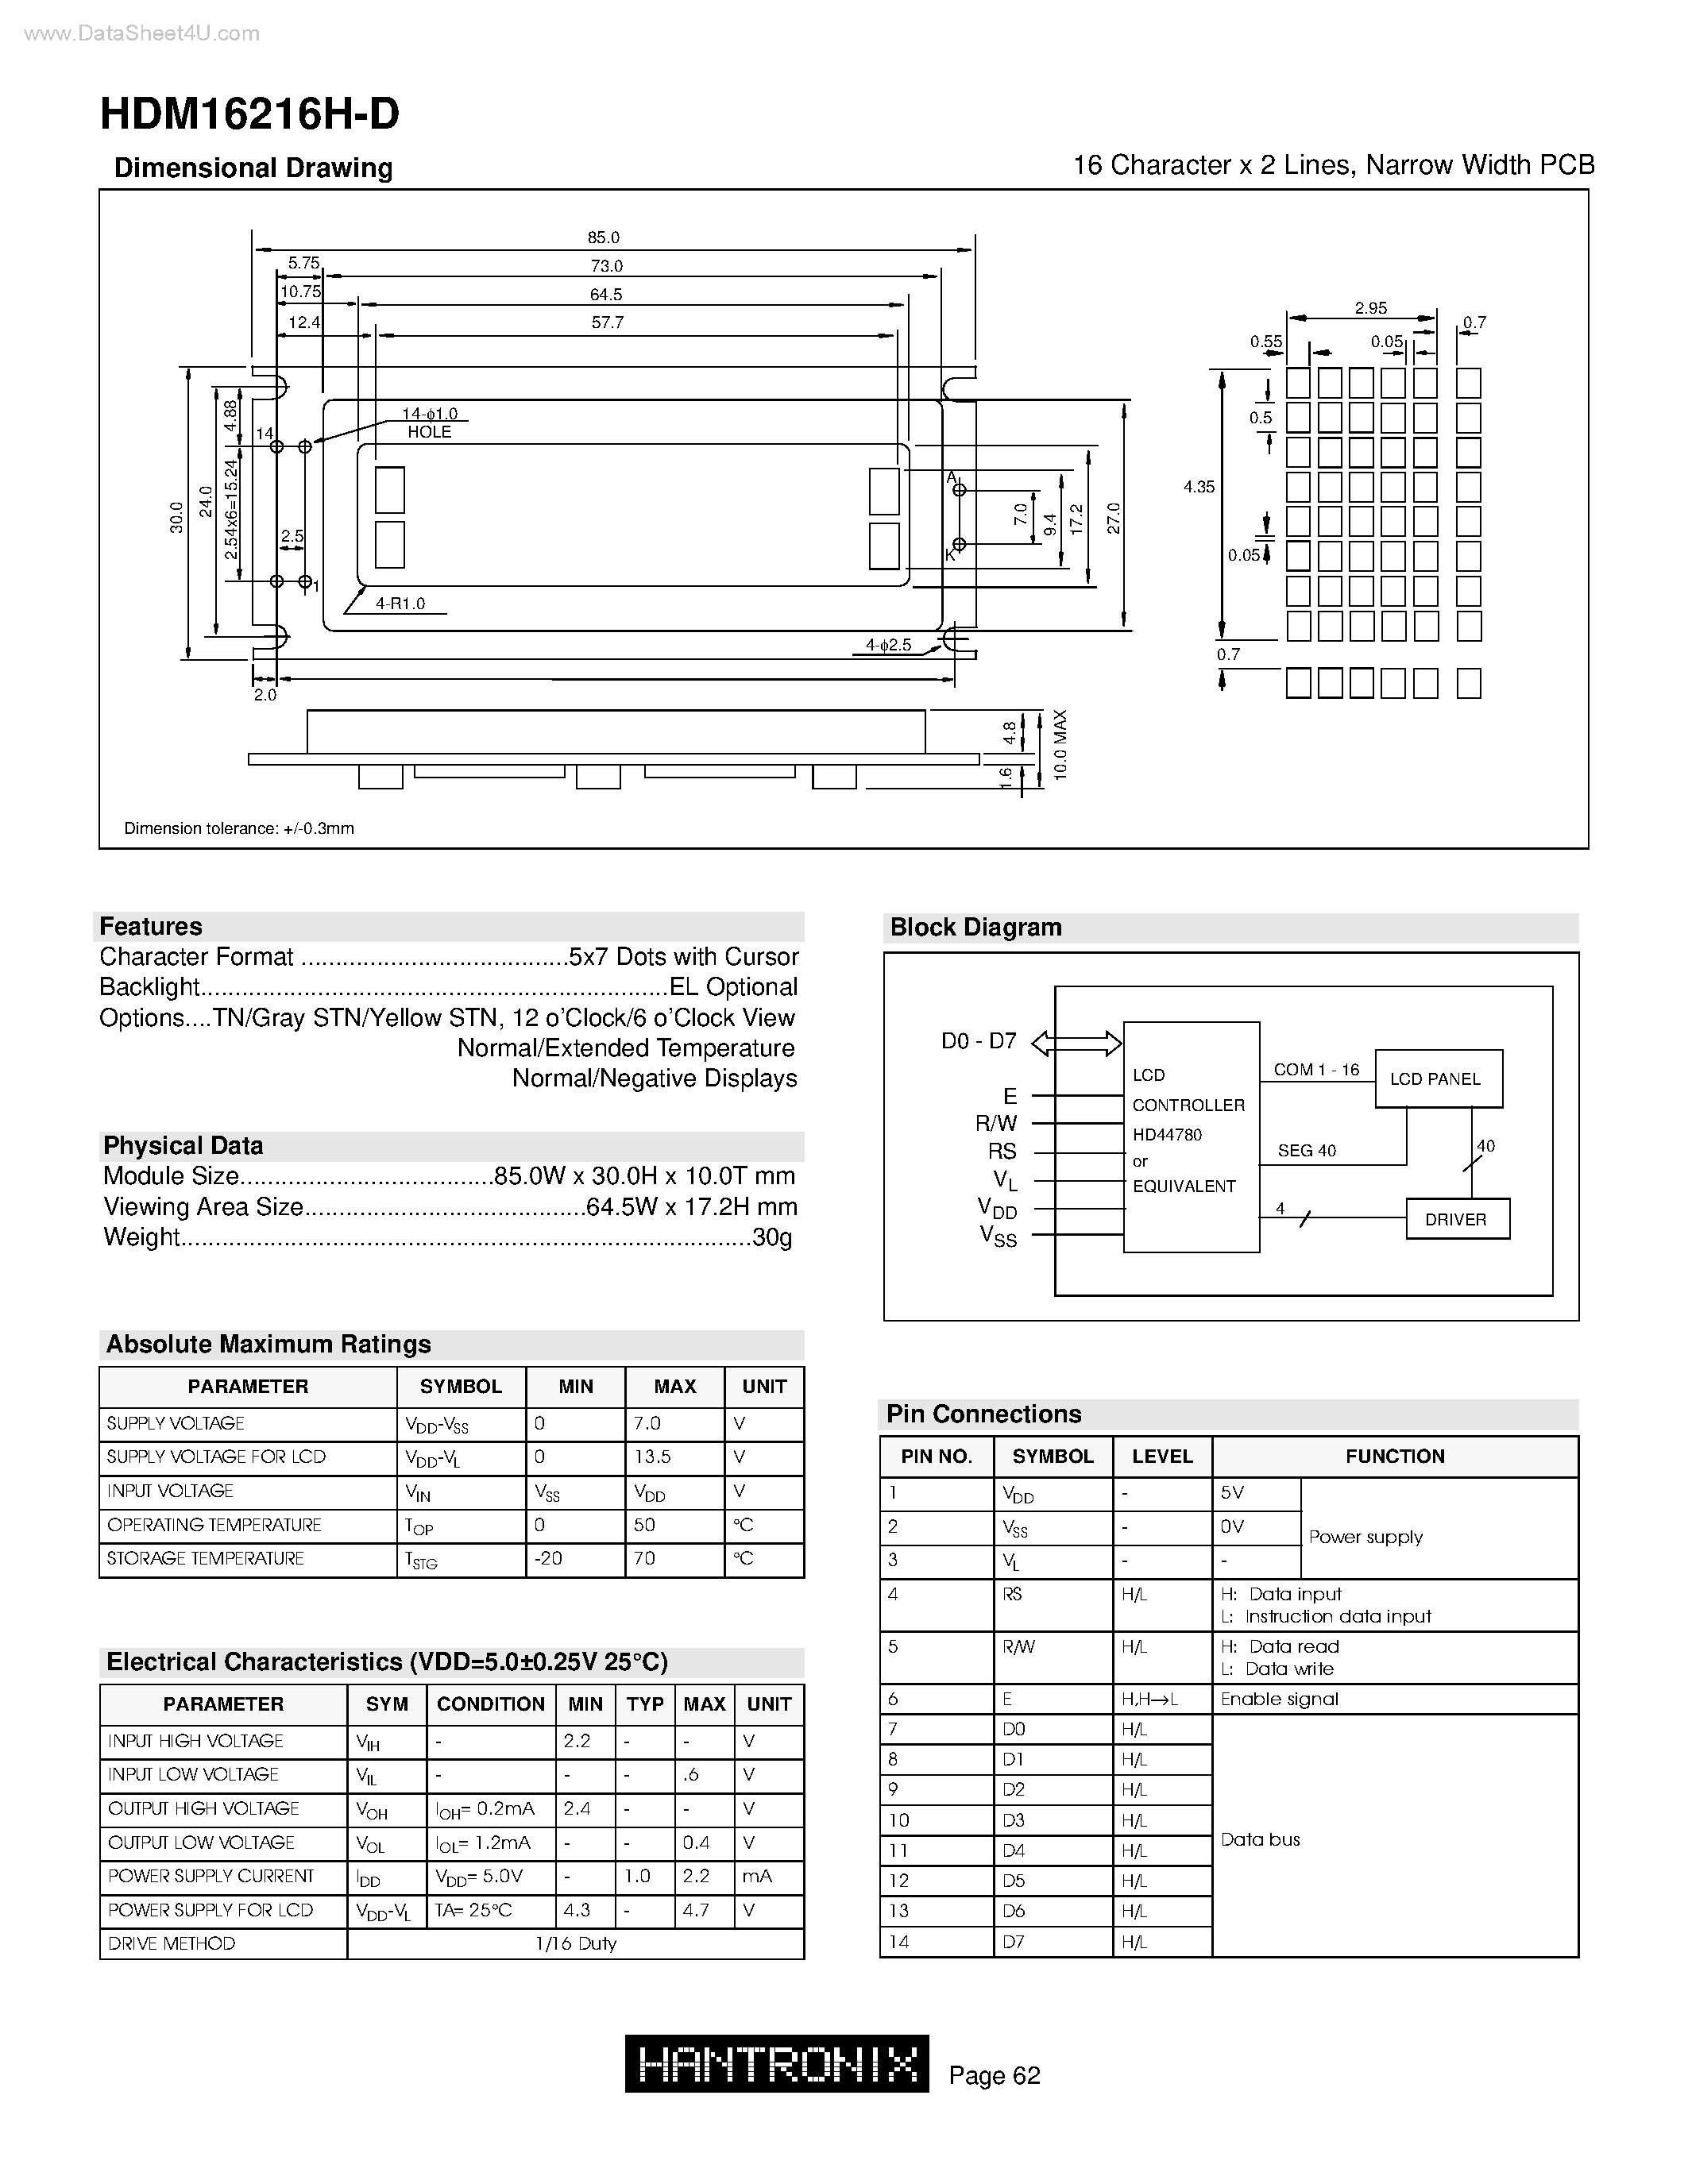 Datasheet HDM16216H-D - 16 Character x 2 Lines page 1